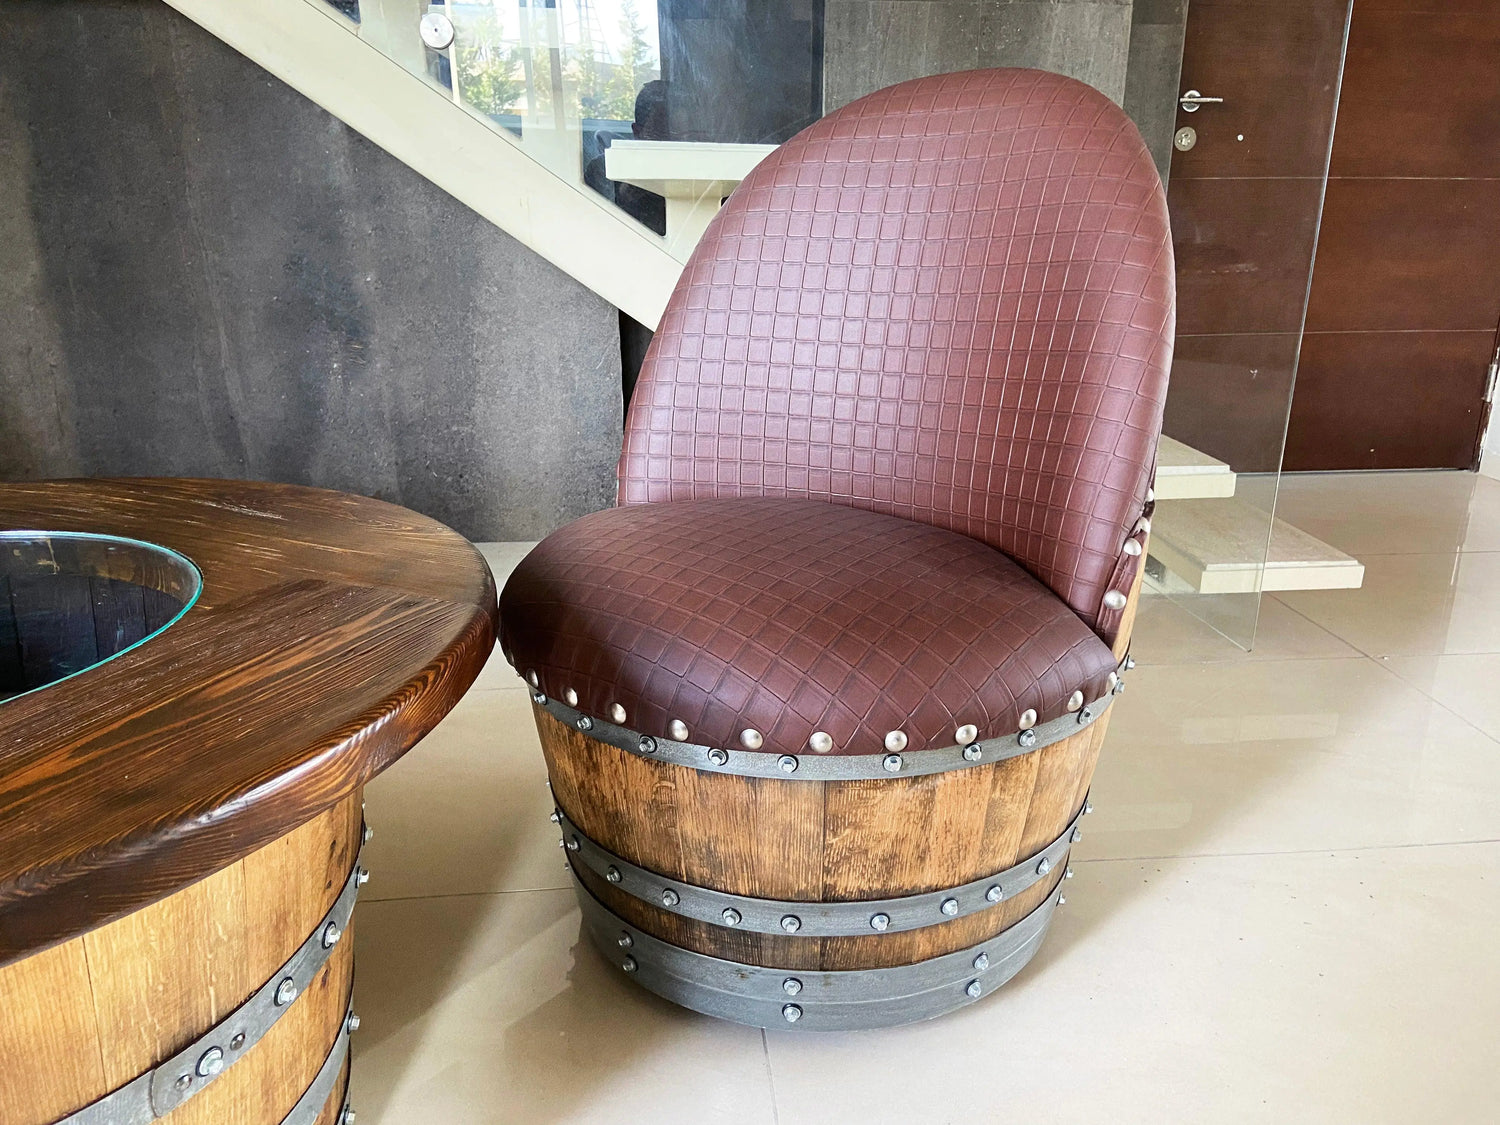 Wine barrel furniture’s high quality helps keep furniture in the family that can be passed down through generations - Oak Wood Wine Barrels